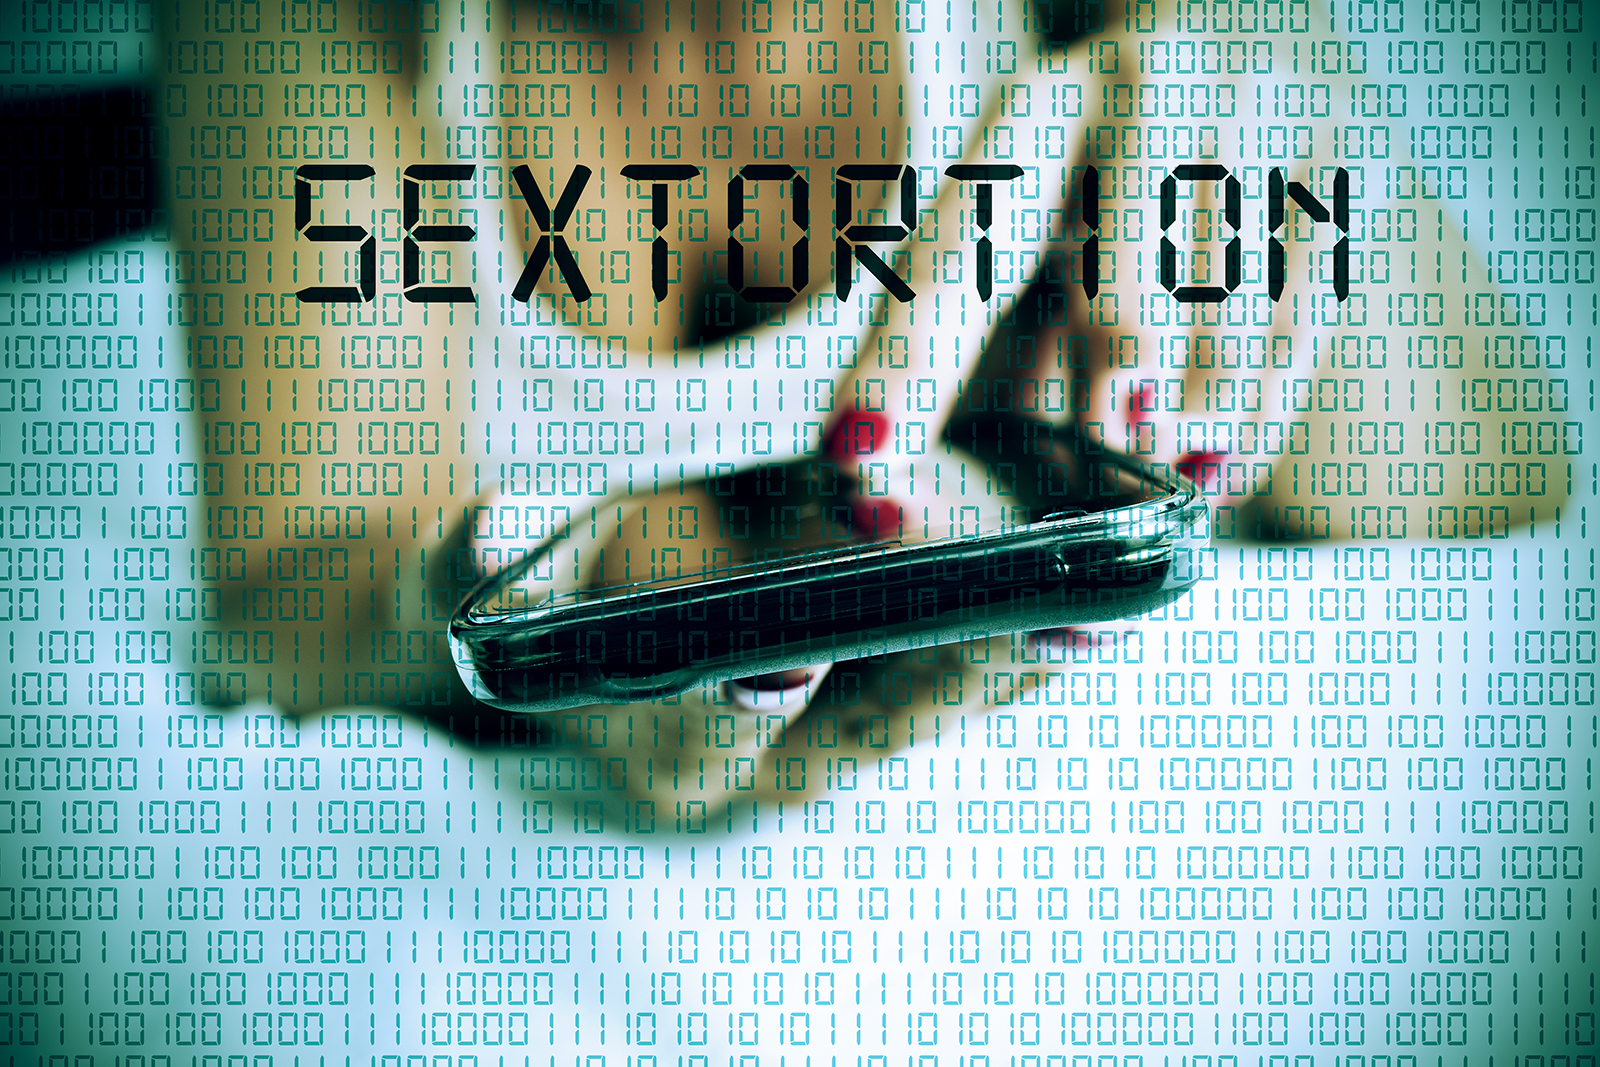 Coconut Creek Man Targeted in Online Sexual Extortion Scam